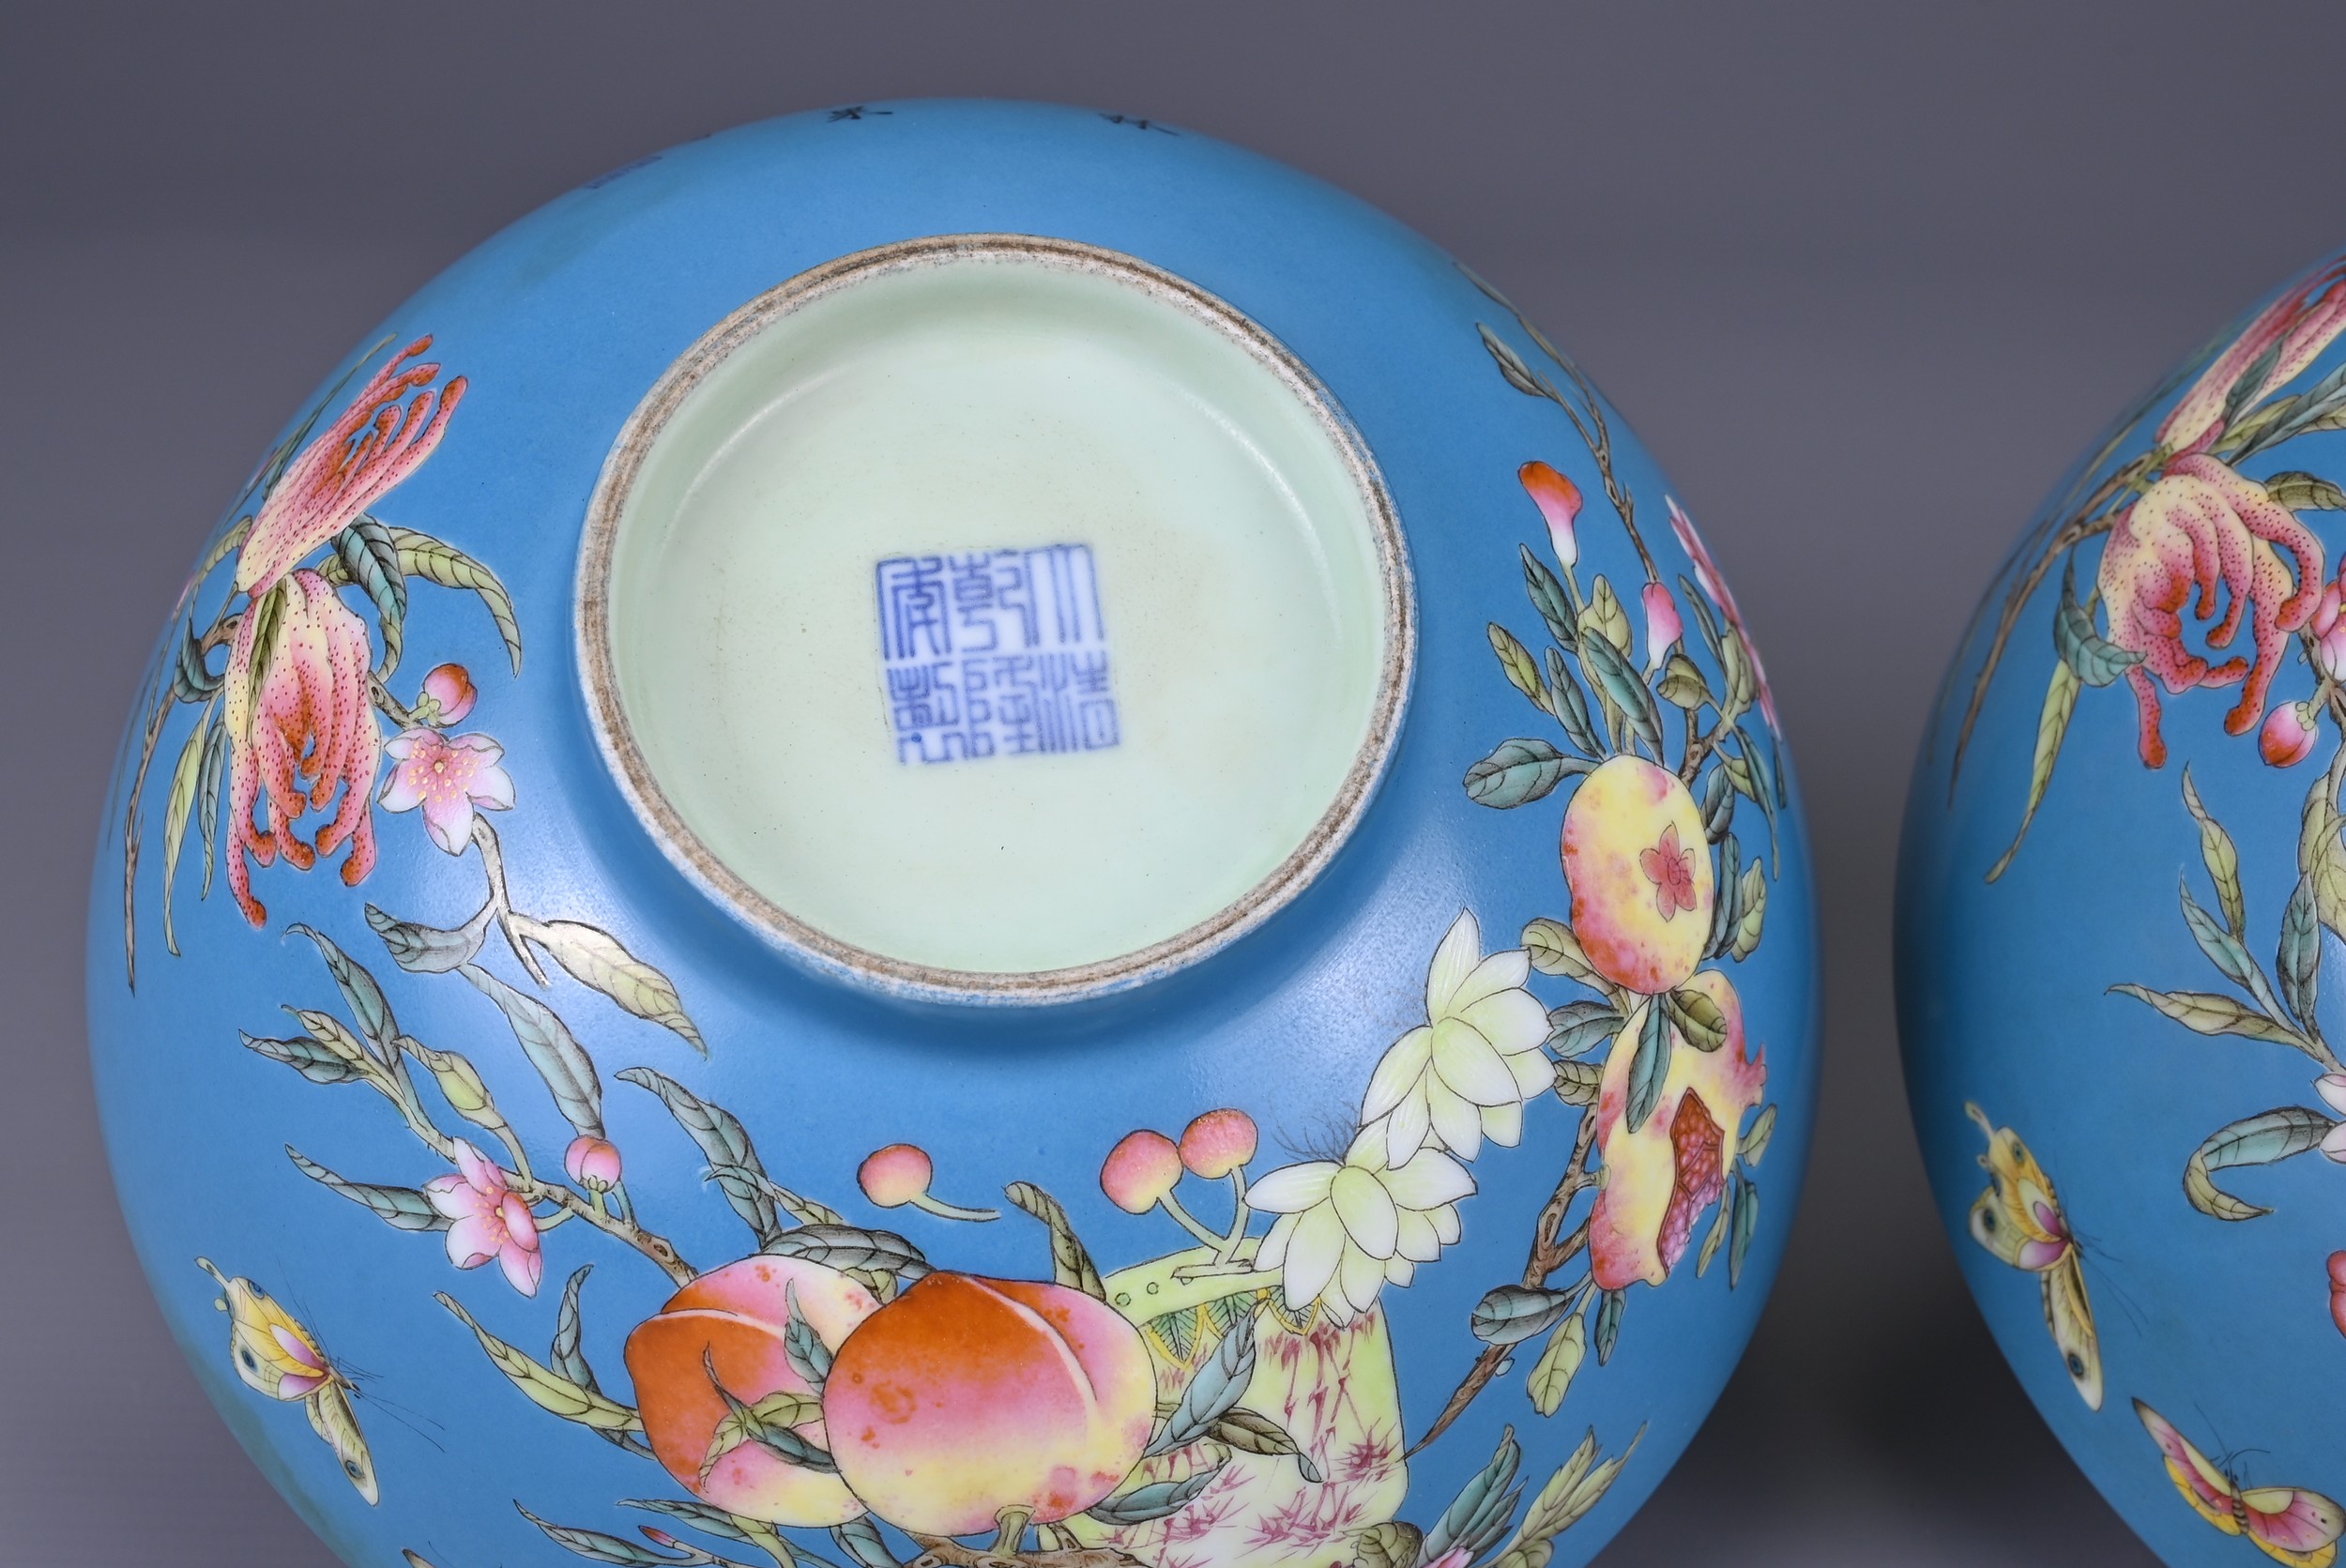 A PAIR OF CHINESE PORCELAIN FAMILLE ROSE AND TURQUOISE GROUND BOWLS, 20TH CENTURY. Each with - Image 4 of 7